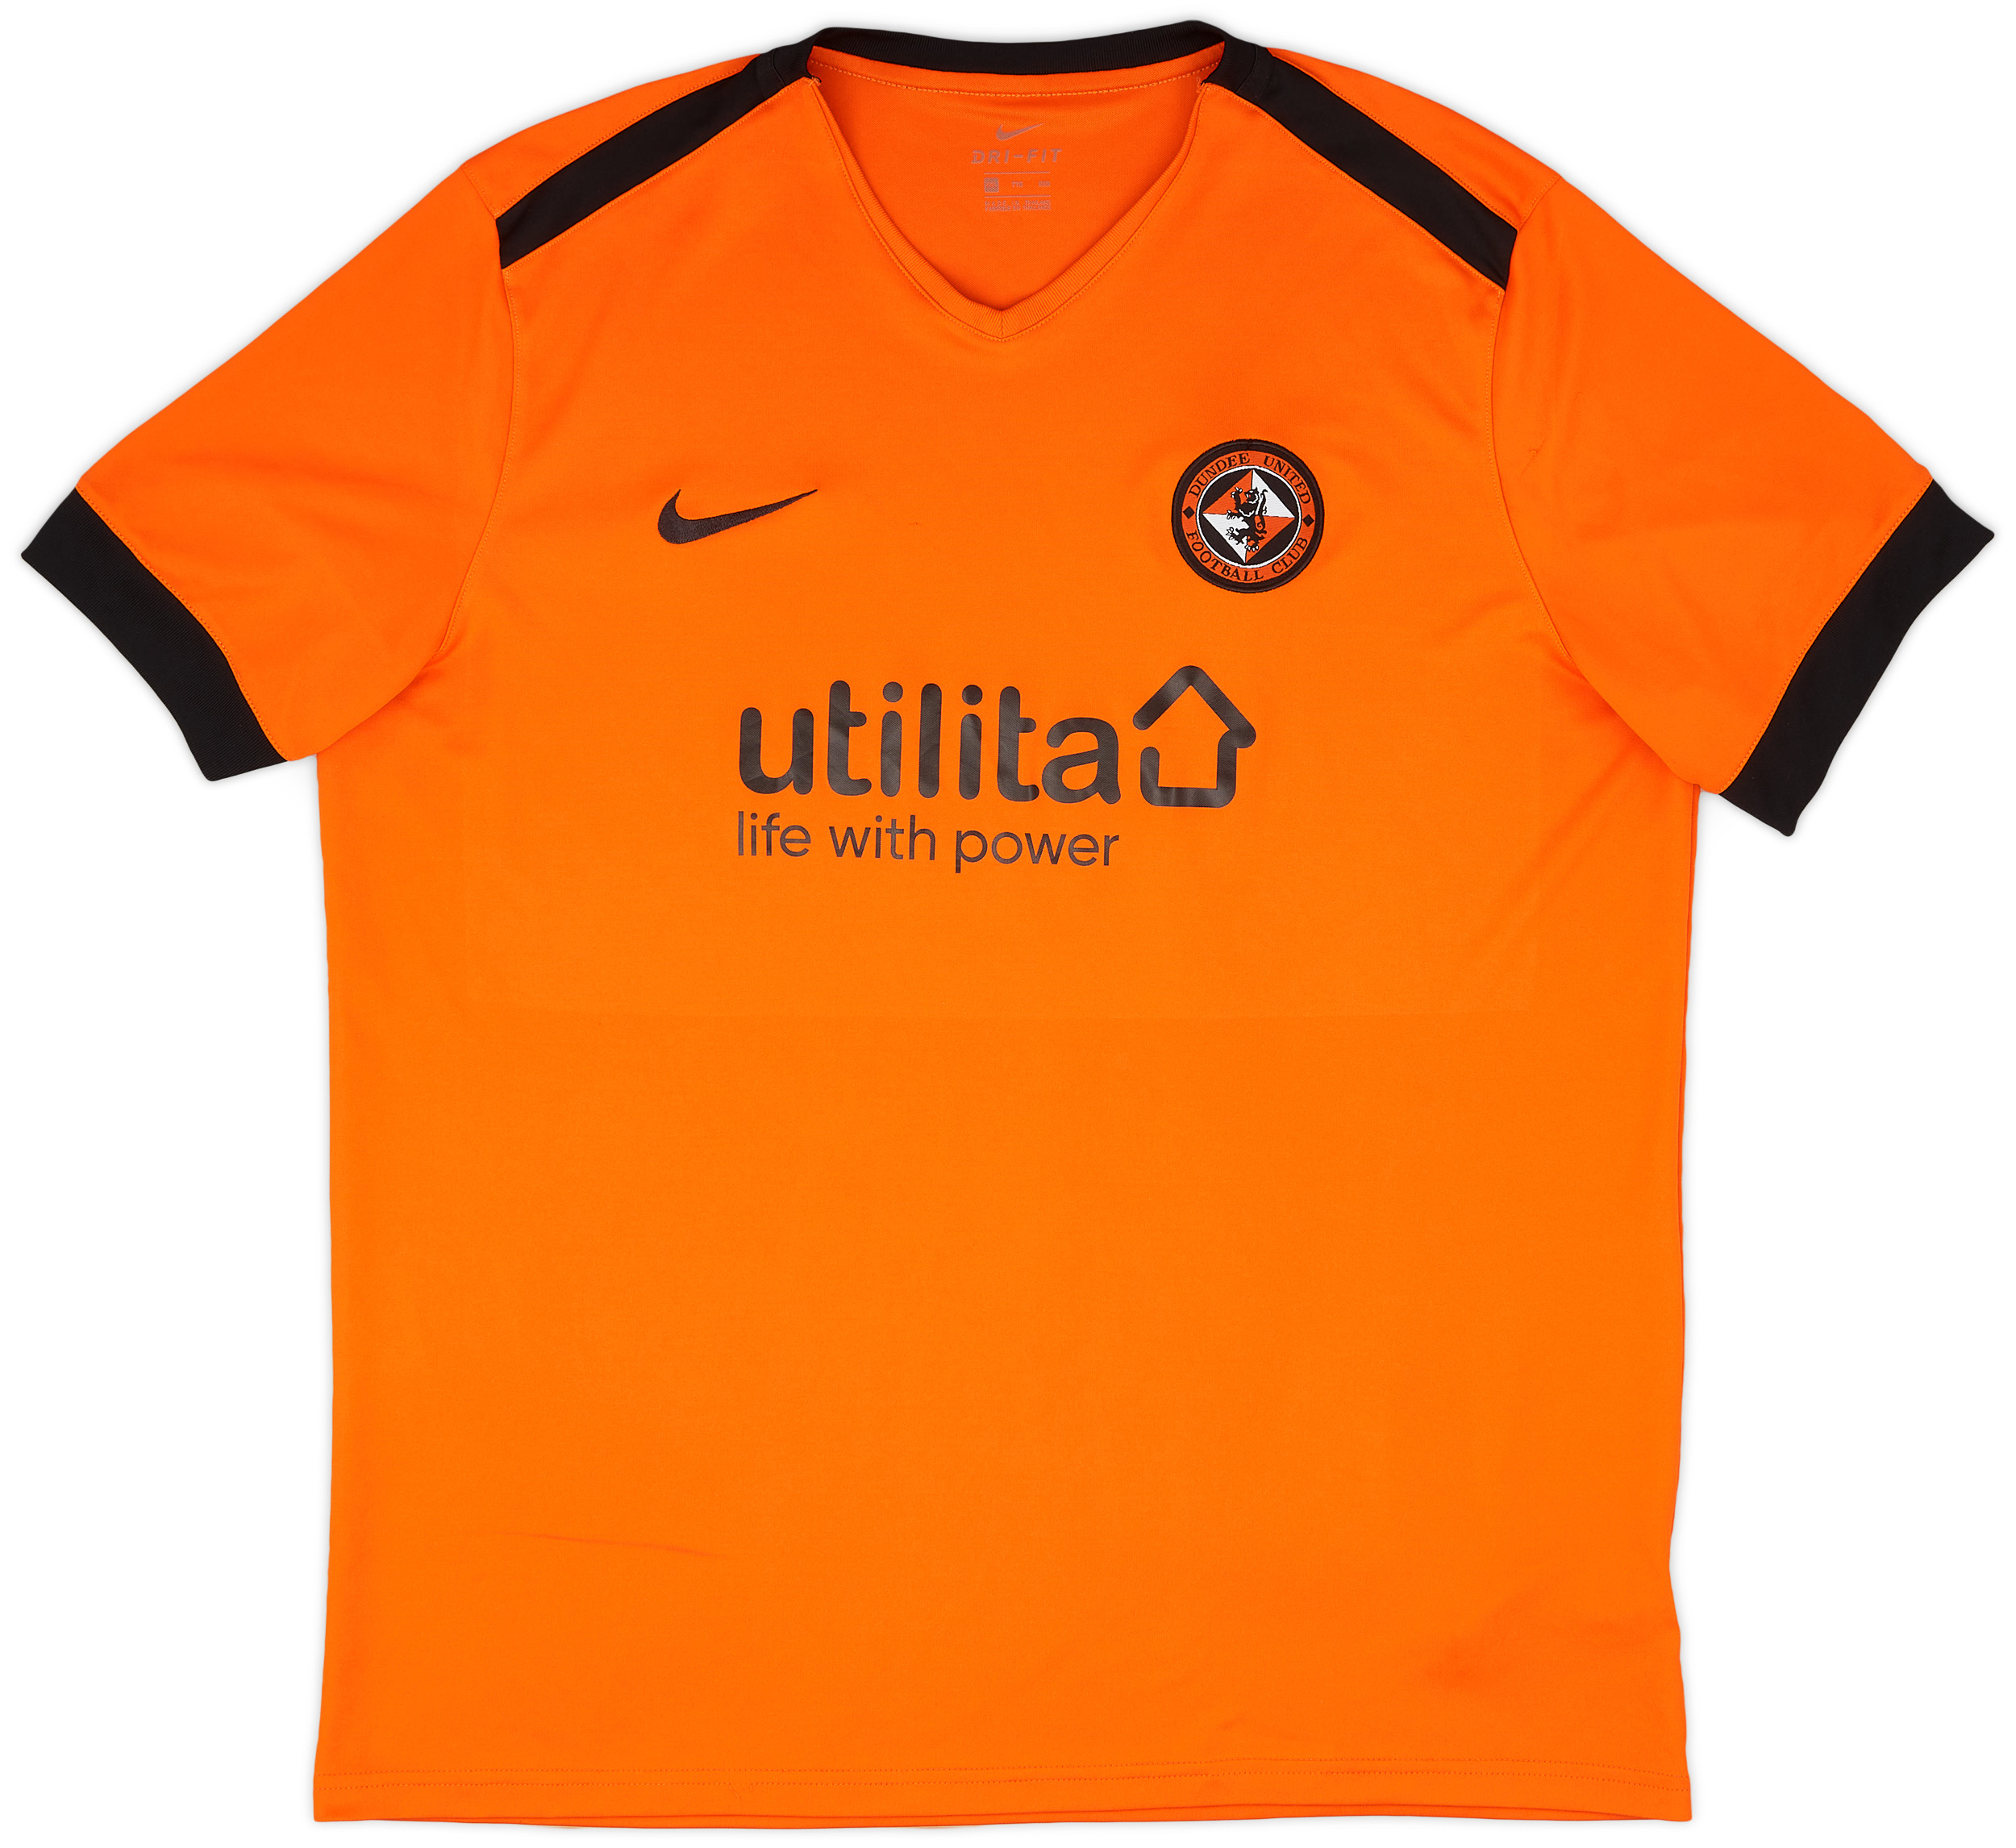 2018-19 Dundee United Home Shirt - 6/10 - ()